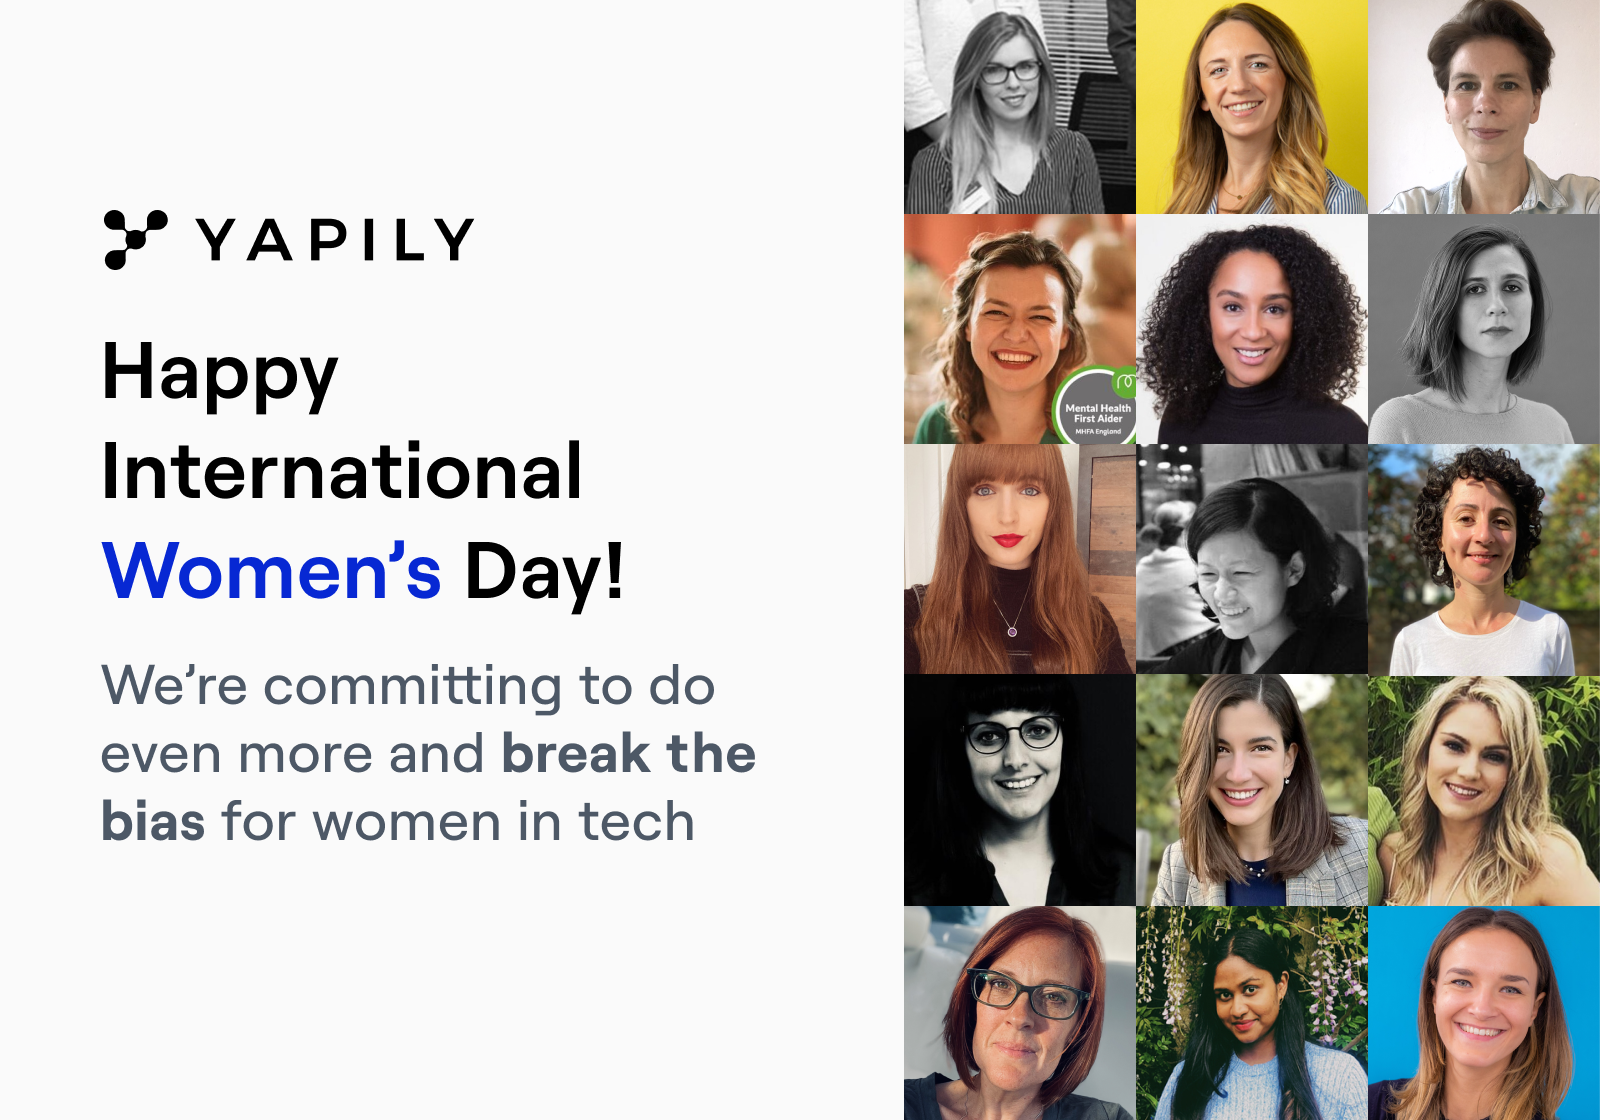 Here at Yapily, we believe that gender diversity and success come hand in hand. That’s why we’re making commitments to become a more diverse workplace today and every day. 